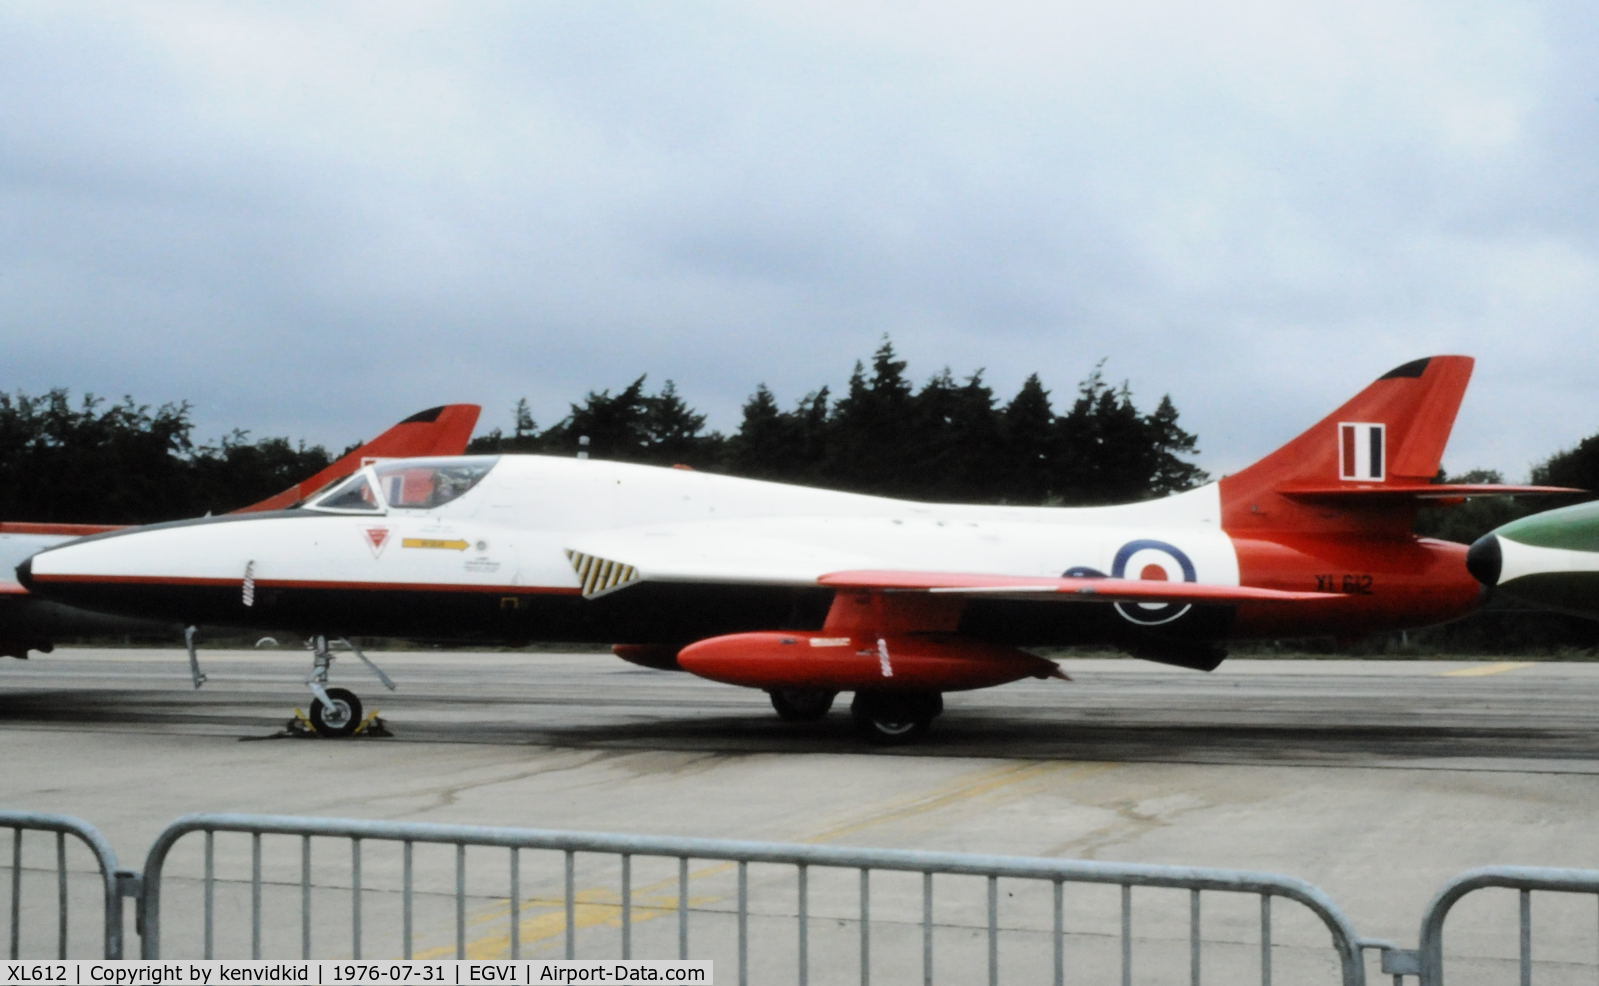 XL612, 1958 Hawker Hunter T.7 C/N 41H-695346, At the 1976 International Air Tattoo Greenham Common, copied from slide.